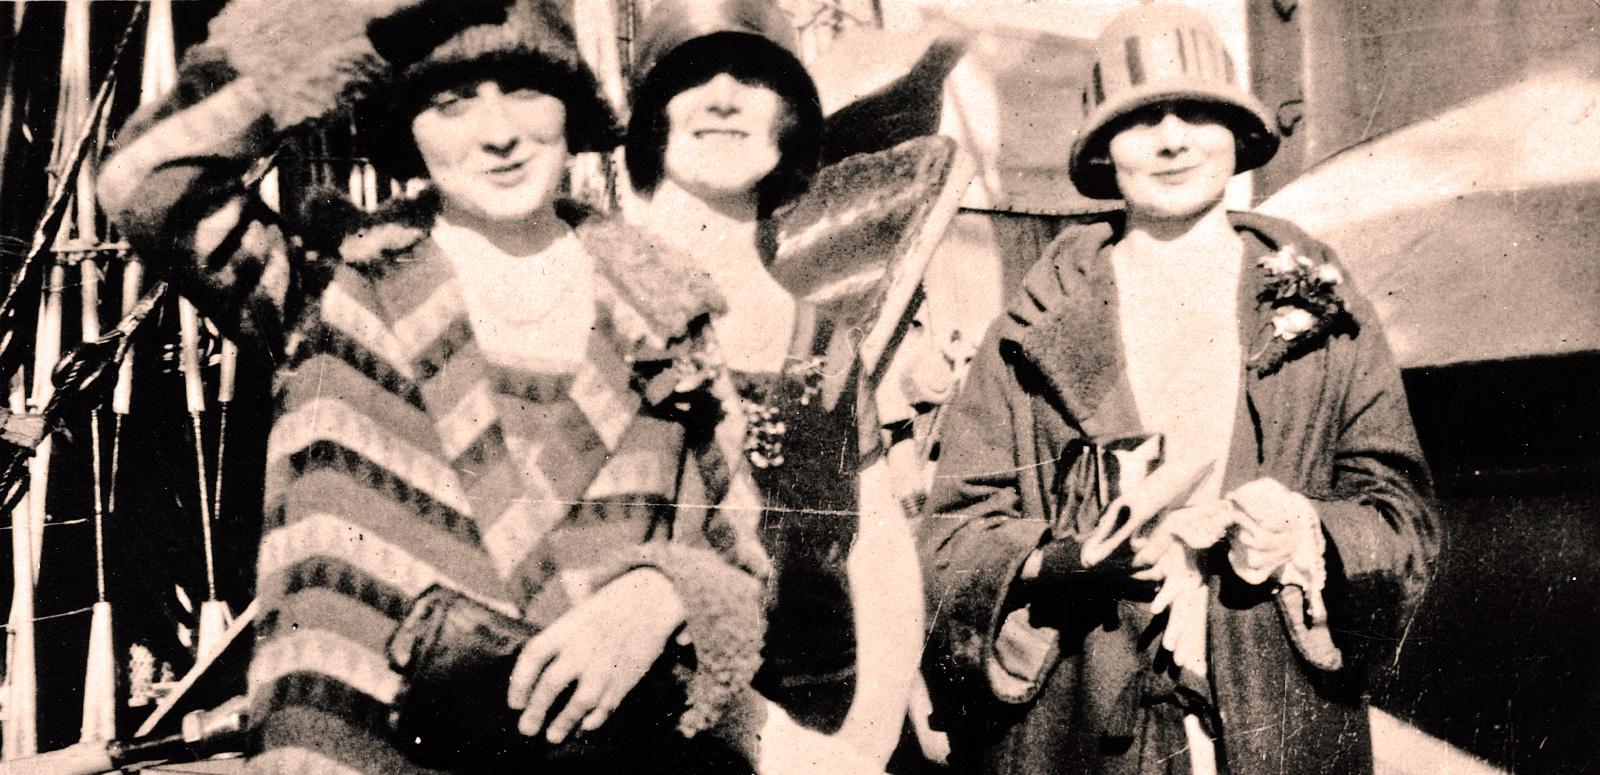 The McDonagh sisters, Isabel, Paulette and Phyllis, pictured from the waist up, wearing coats and hats and standing on the deck of a ship.